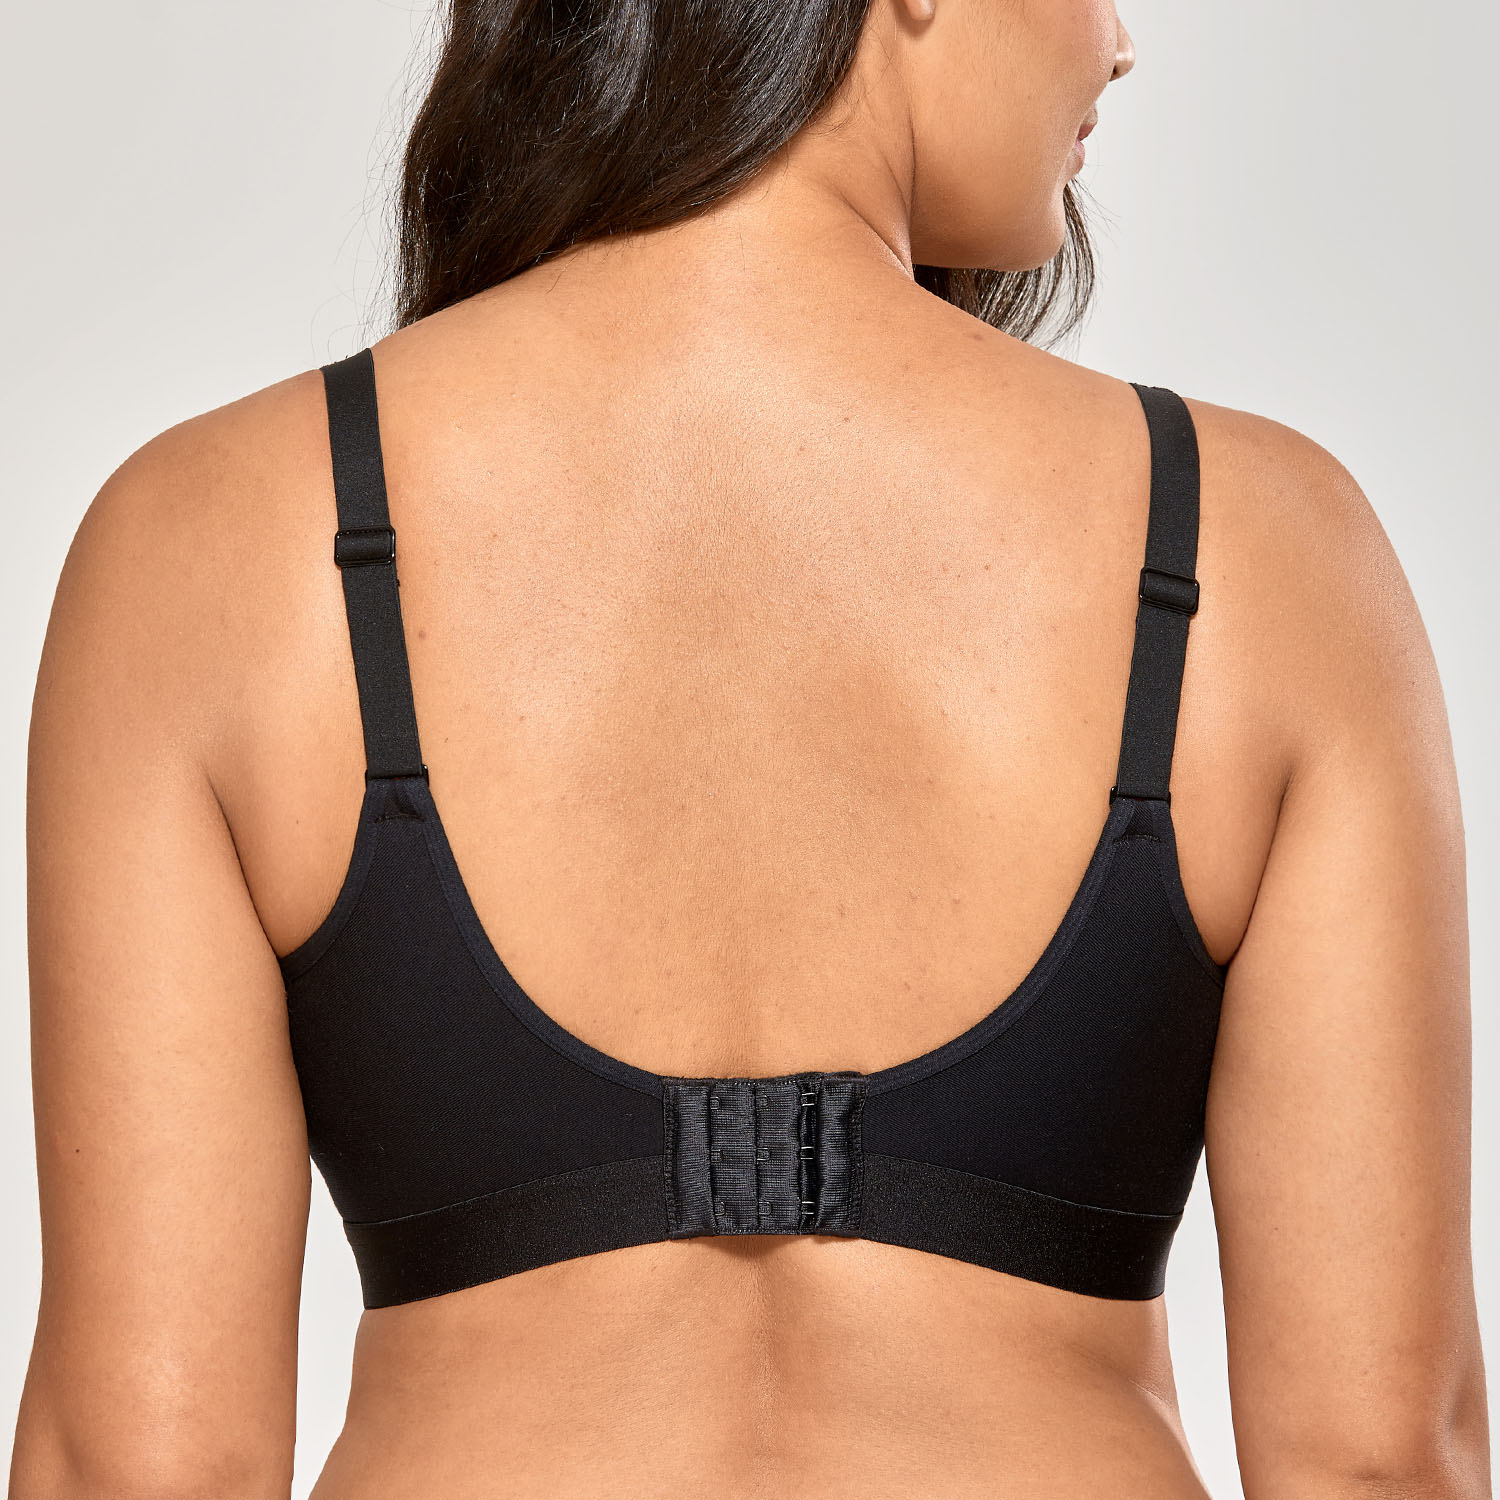 AILIVIN Wireless Full Coverage Plus Size Bras for Nepal